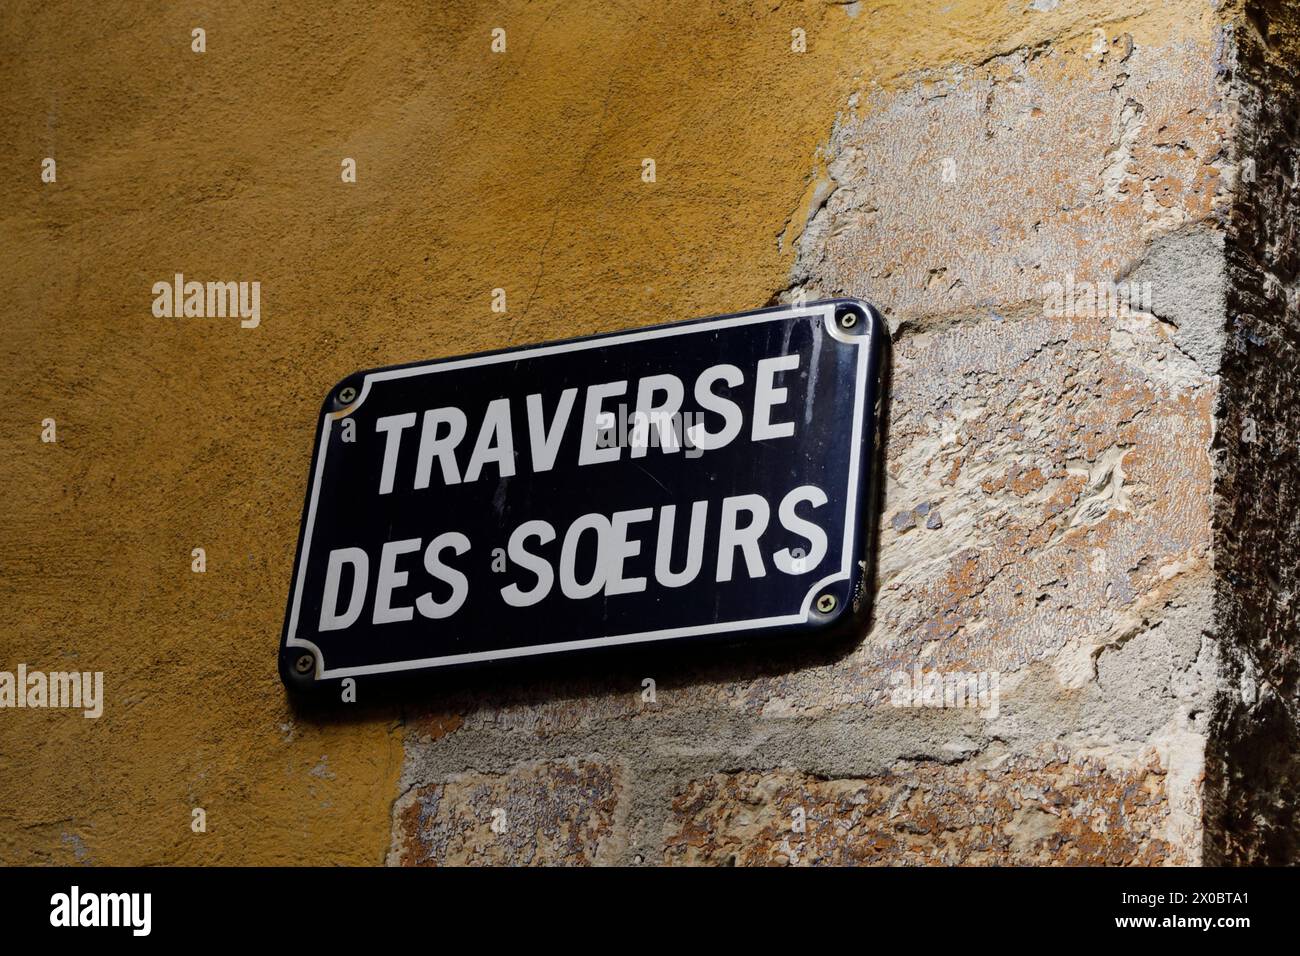 Traverse Des Soeurs Street Sign Mounted on a Weathered Wall in Grasse, Provence-Alpes-Côte dAzur., France Stock Photo